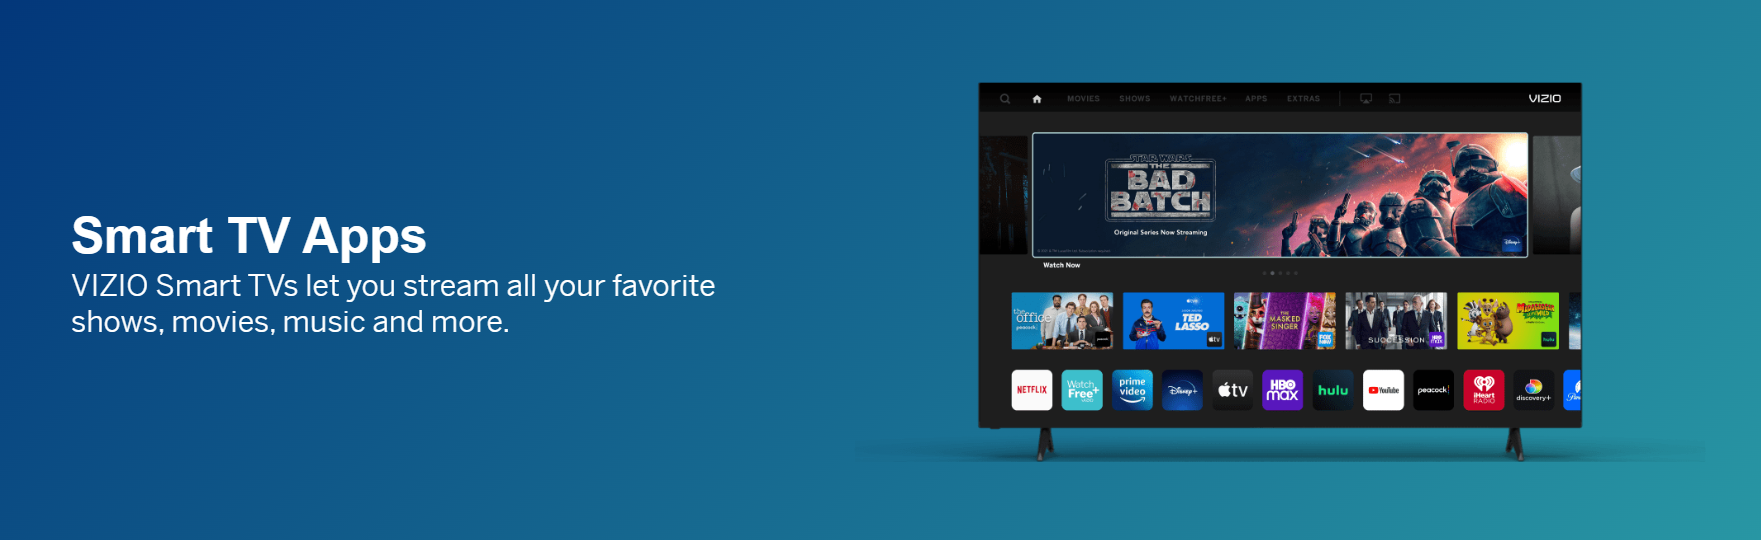 smart tv apps : How To Add And Update Apps On Vizio Smart TV 